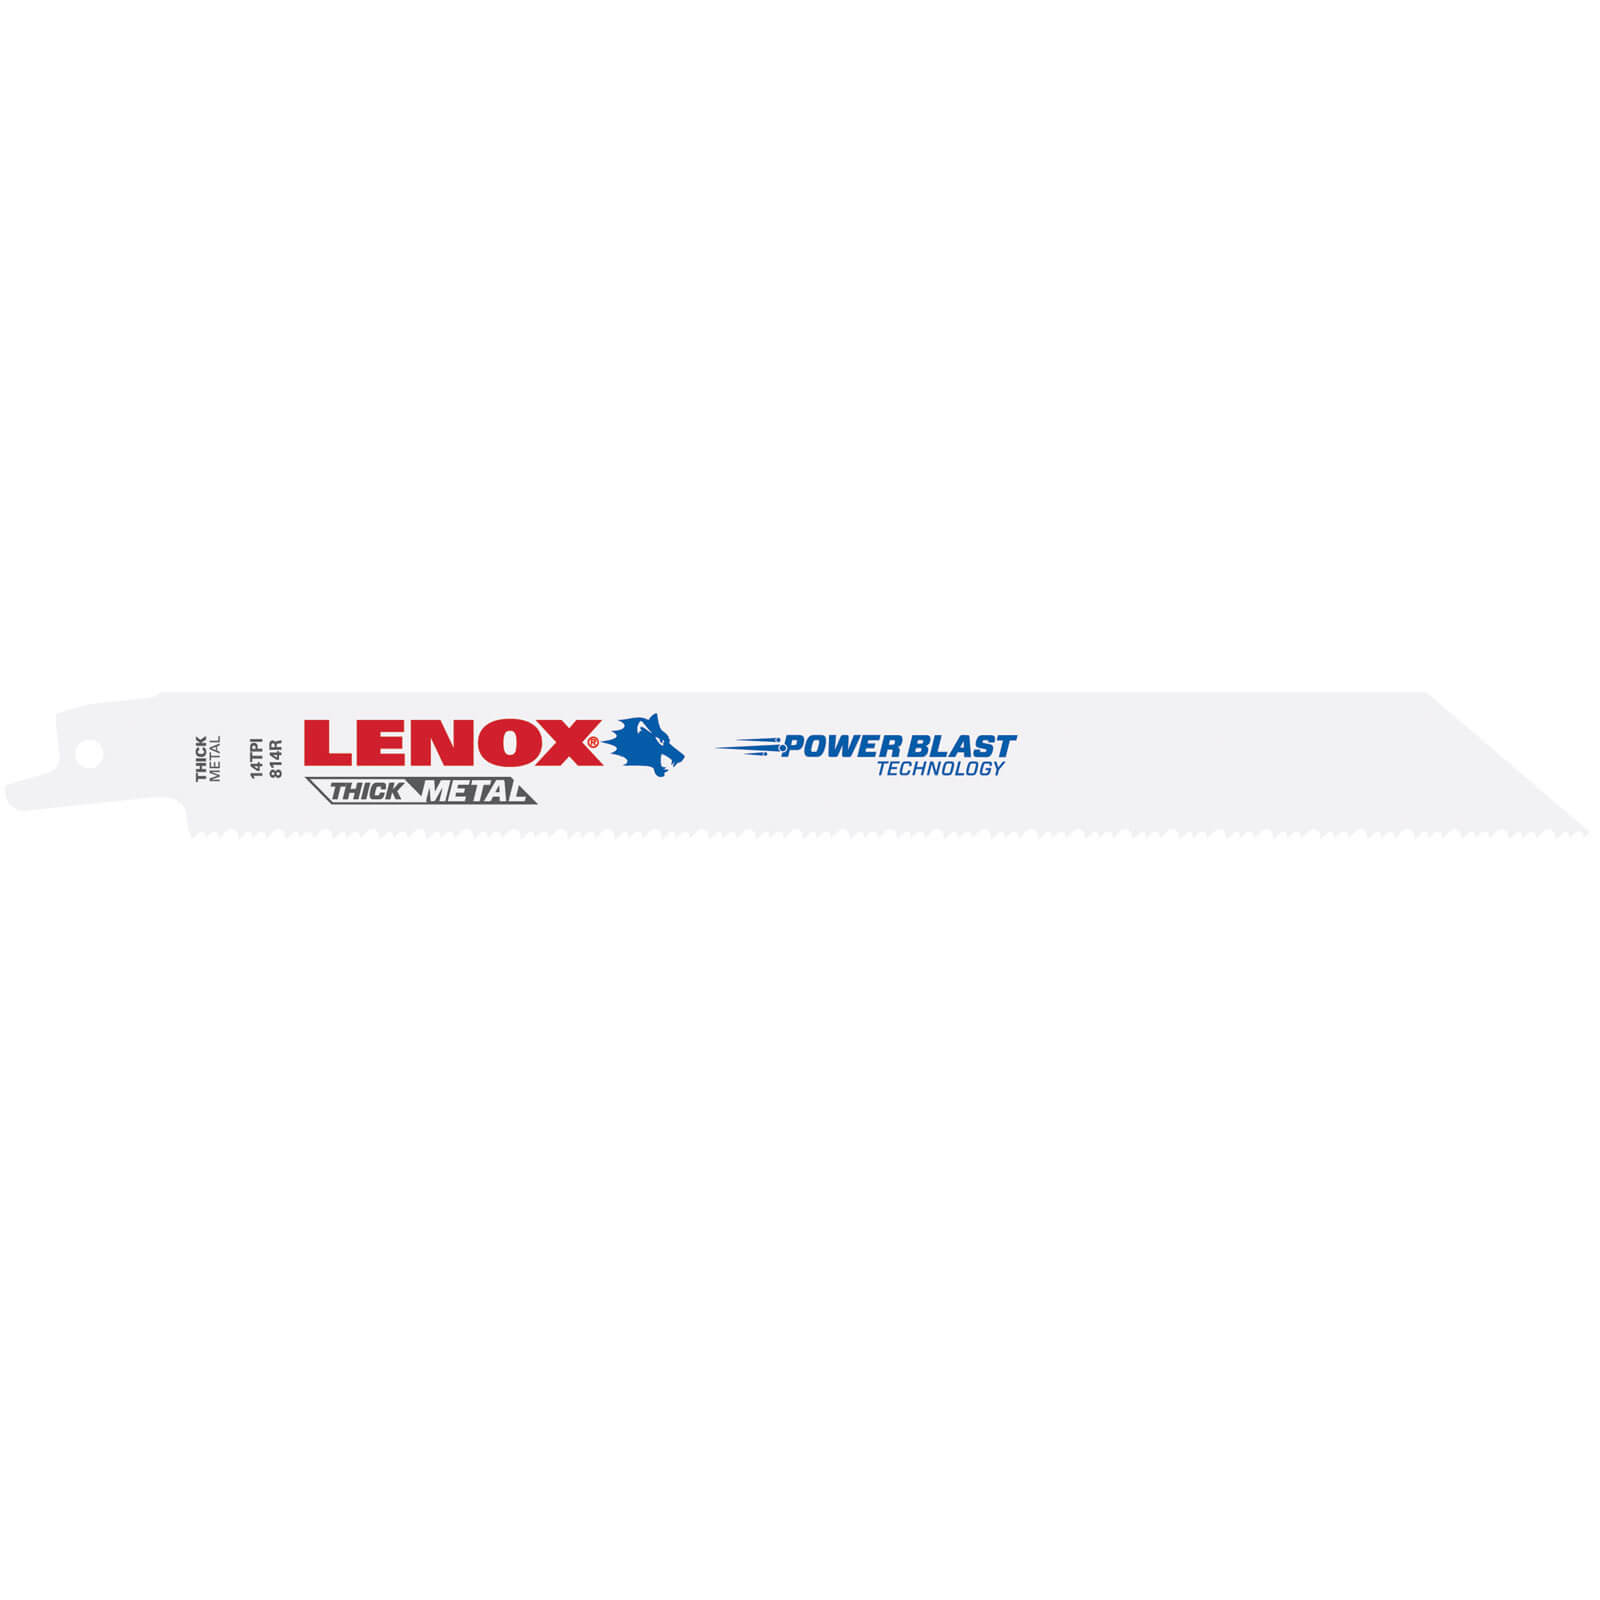 Image of Lenox 14TPI Thick Metal Cutting Reciprocating Sabre Saw Blades 203mm Pack of 5